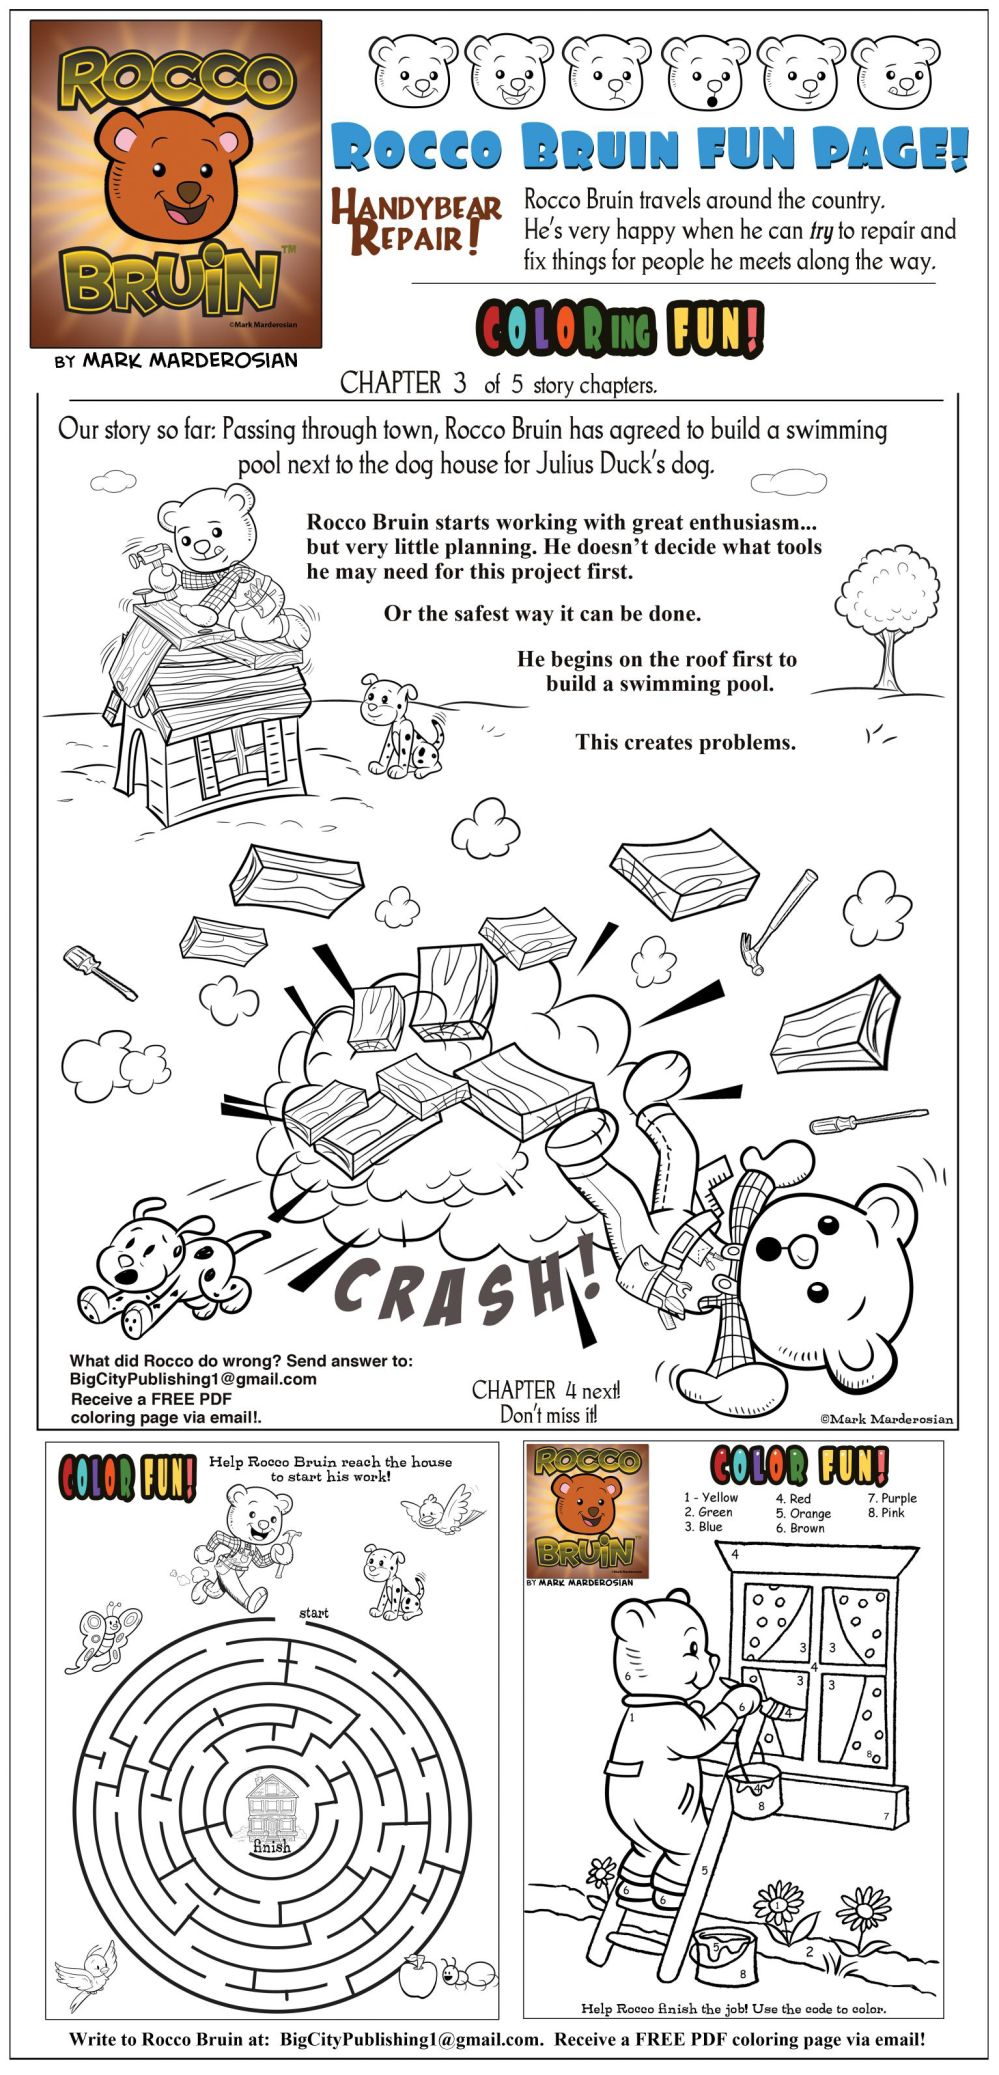 Download And Print These Kids Activity Sheets To Pass The Time Entertainment Gwinnettdailypost Com